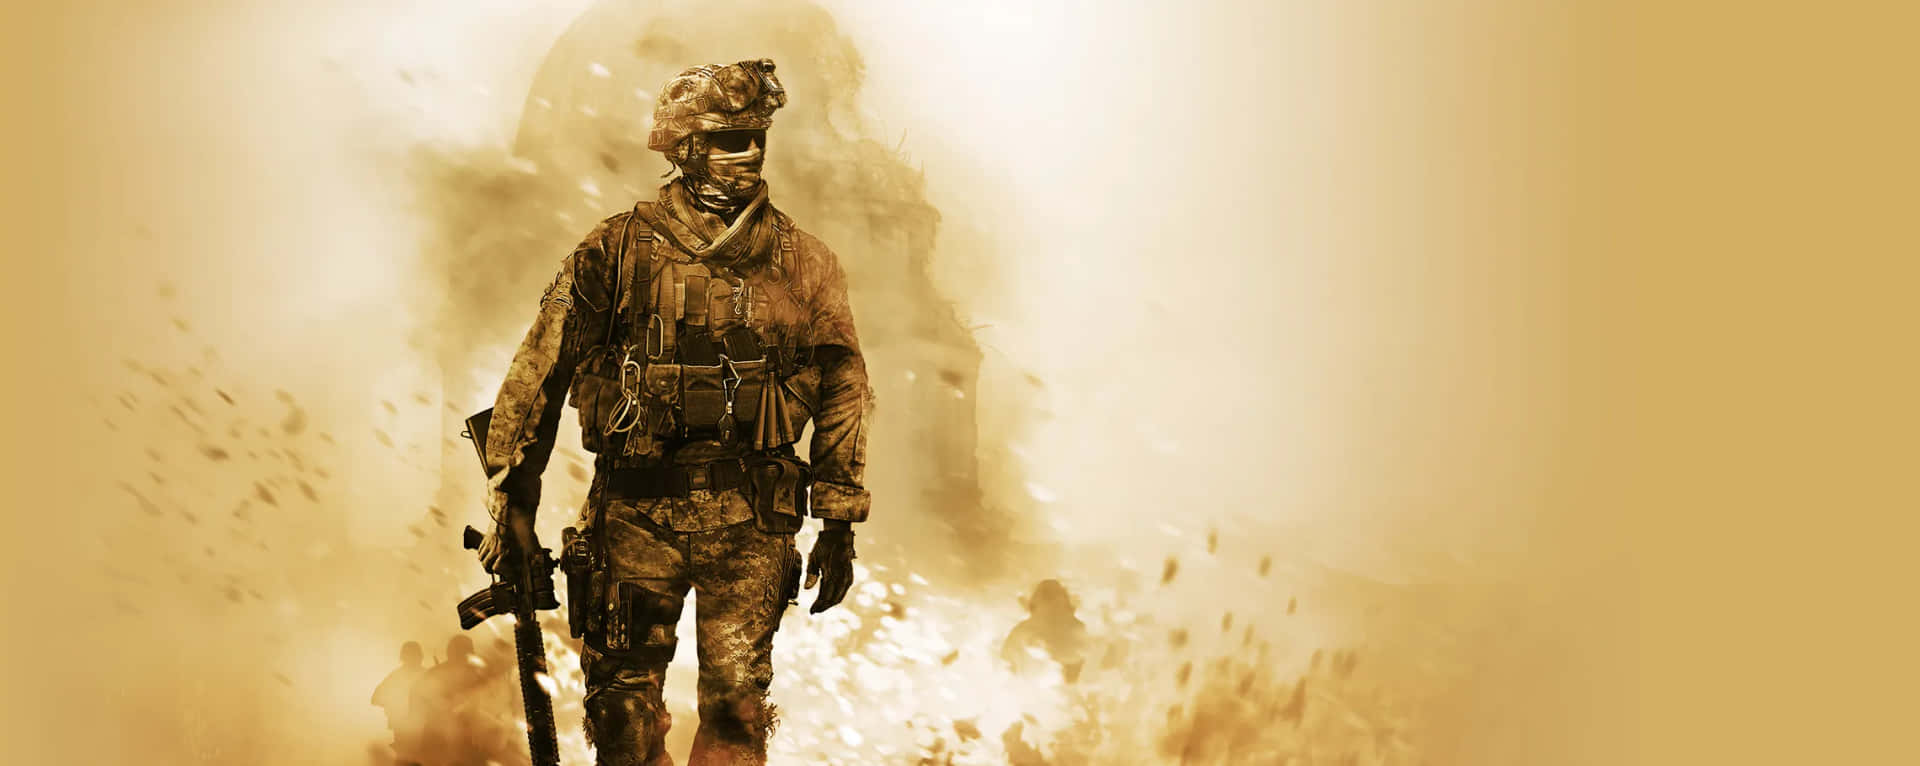 Live Out Your Warzone Action in Call of Duty Modern Warfare Wallpaper